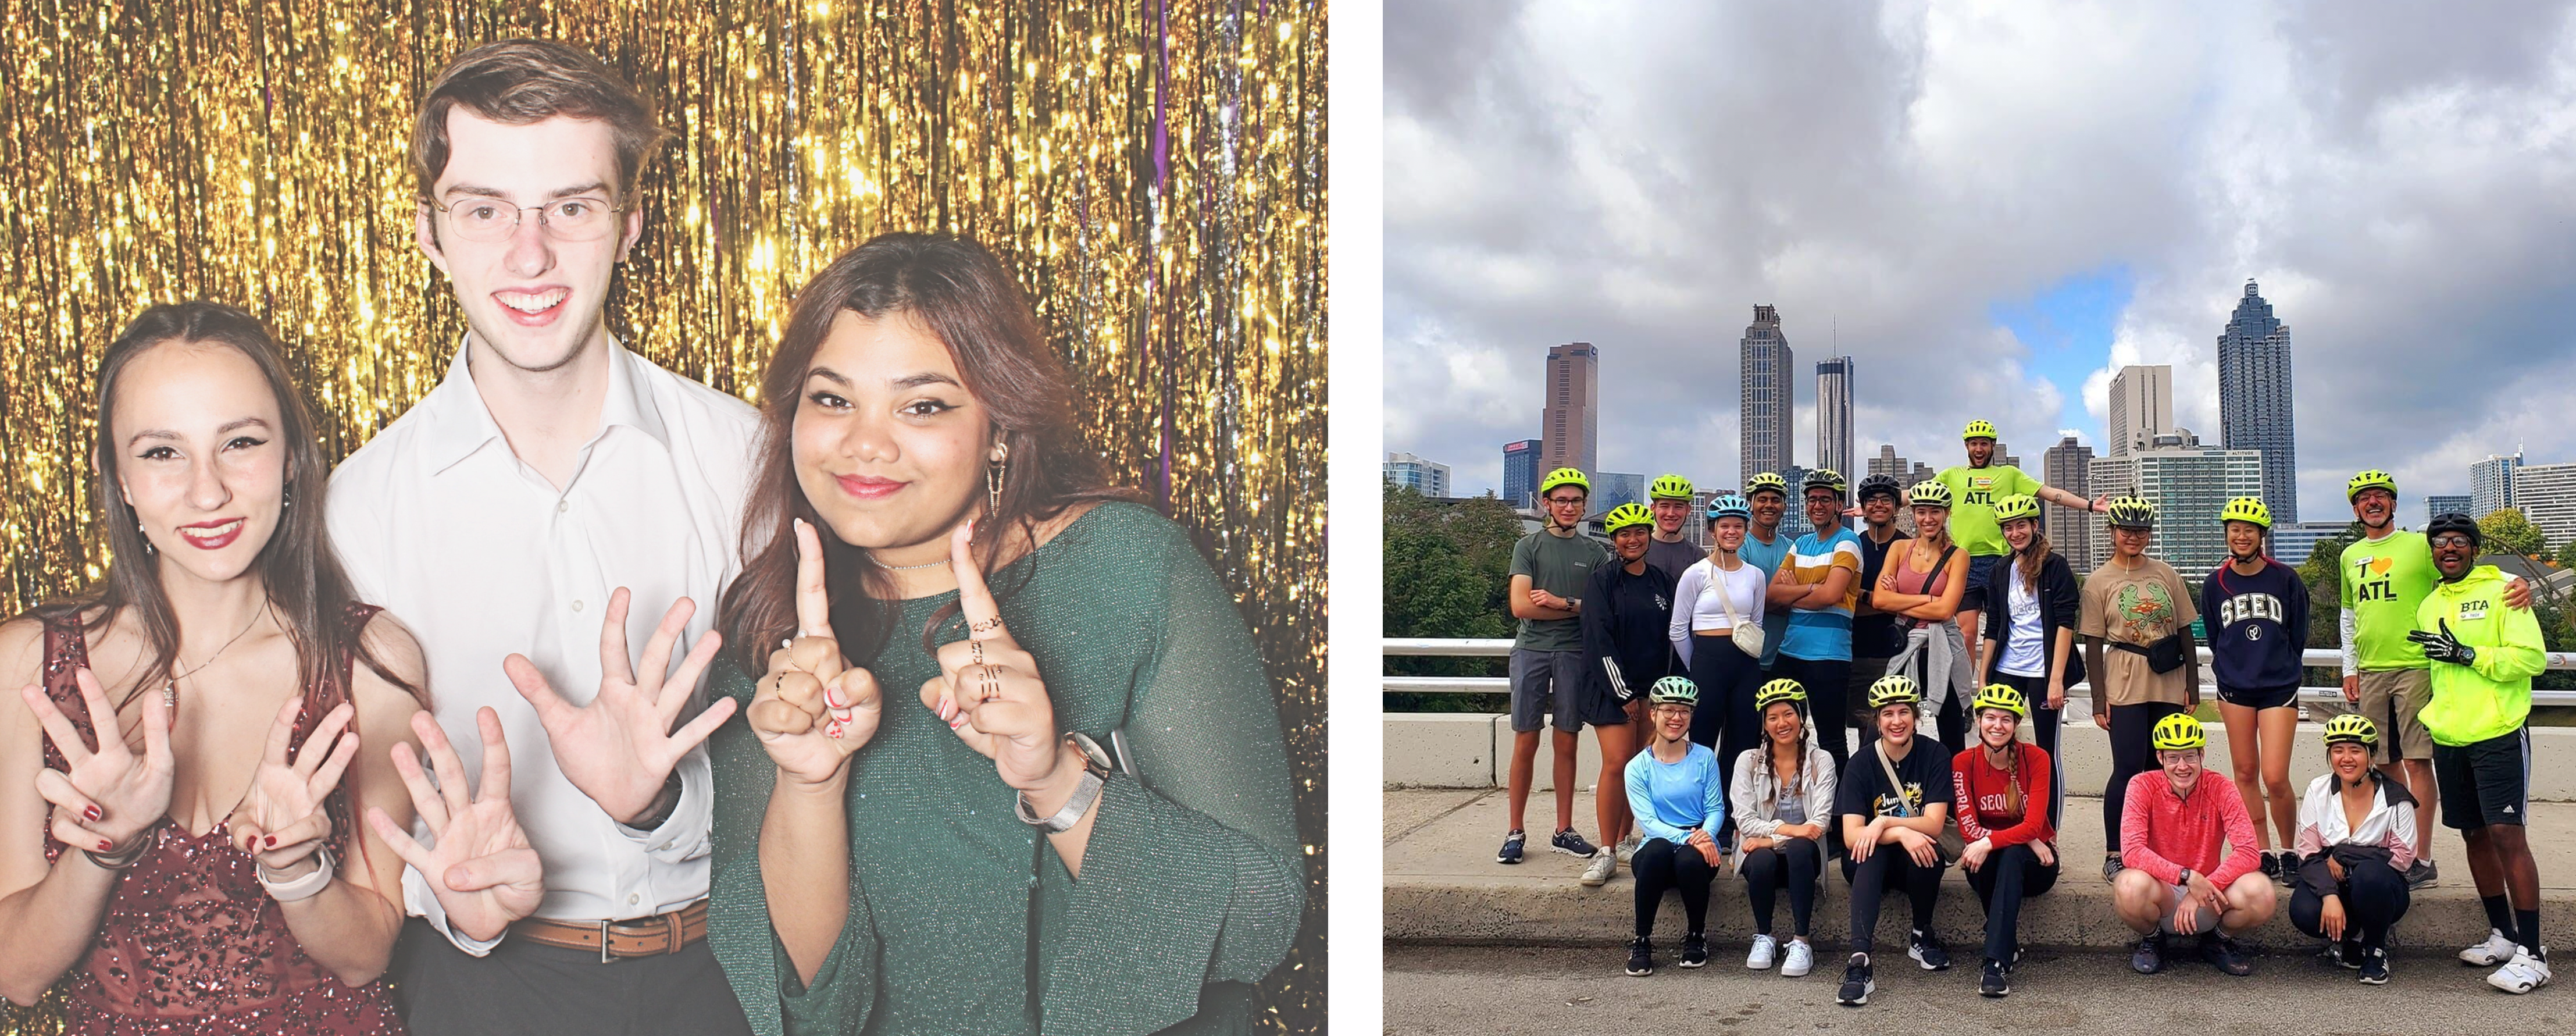 HP students at HProm and on an Atlanta bike tour